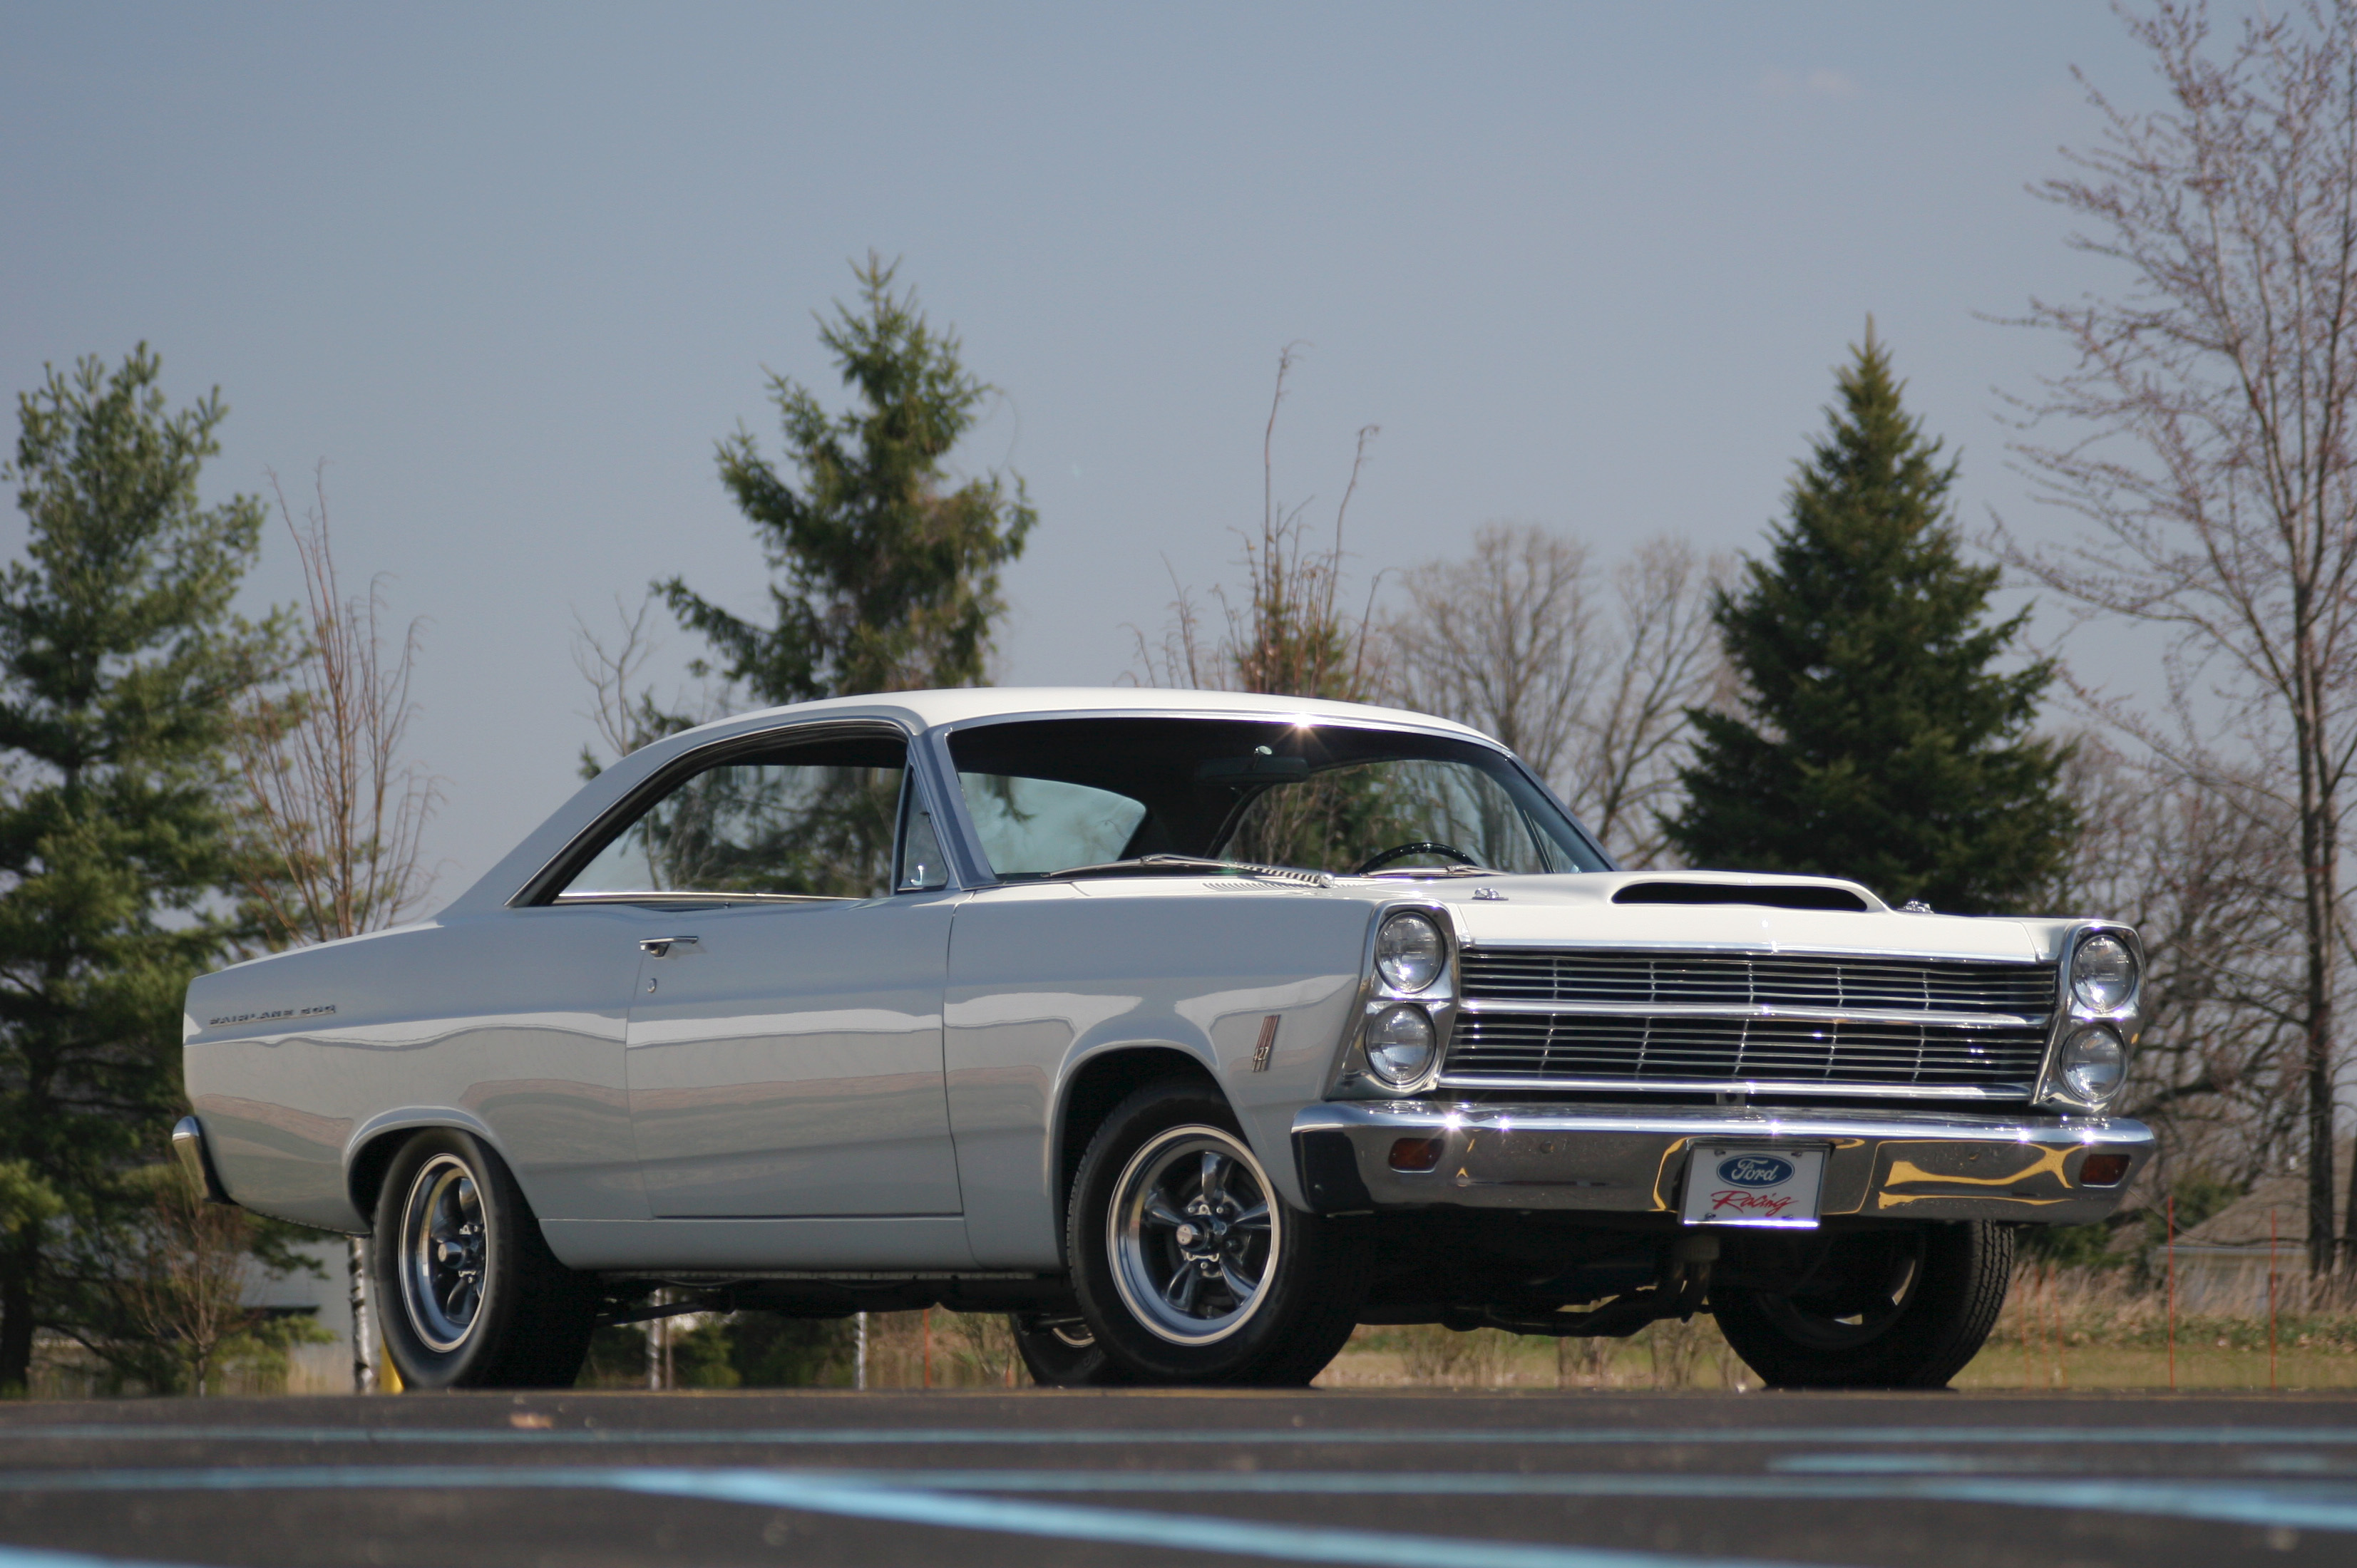 1966 Ford Fairlane 500 Gt Hd Wallpaper Background Image